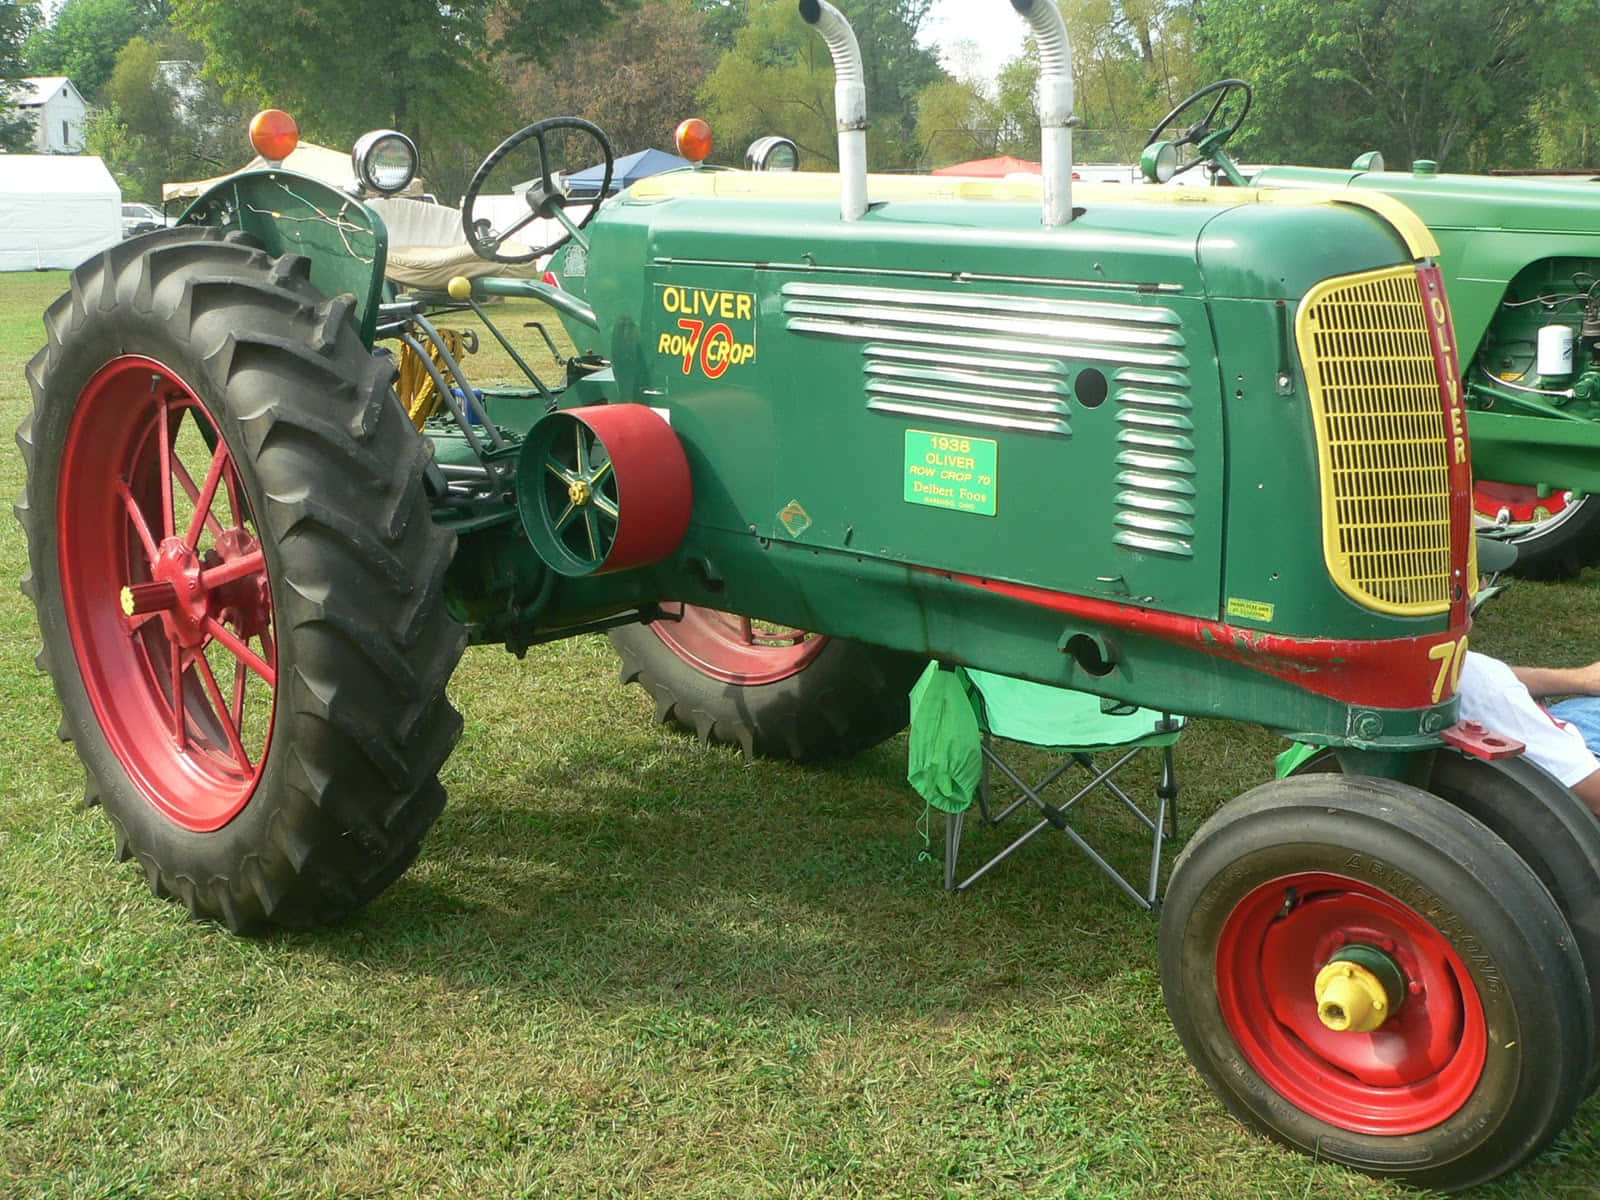 Oliver Row Crop Tractor Picture